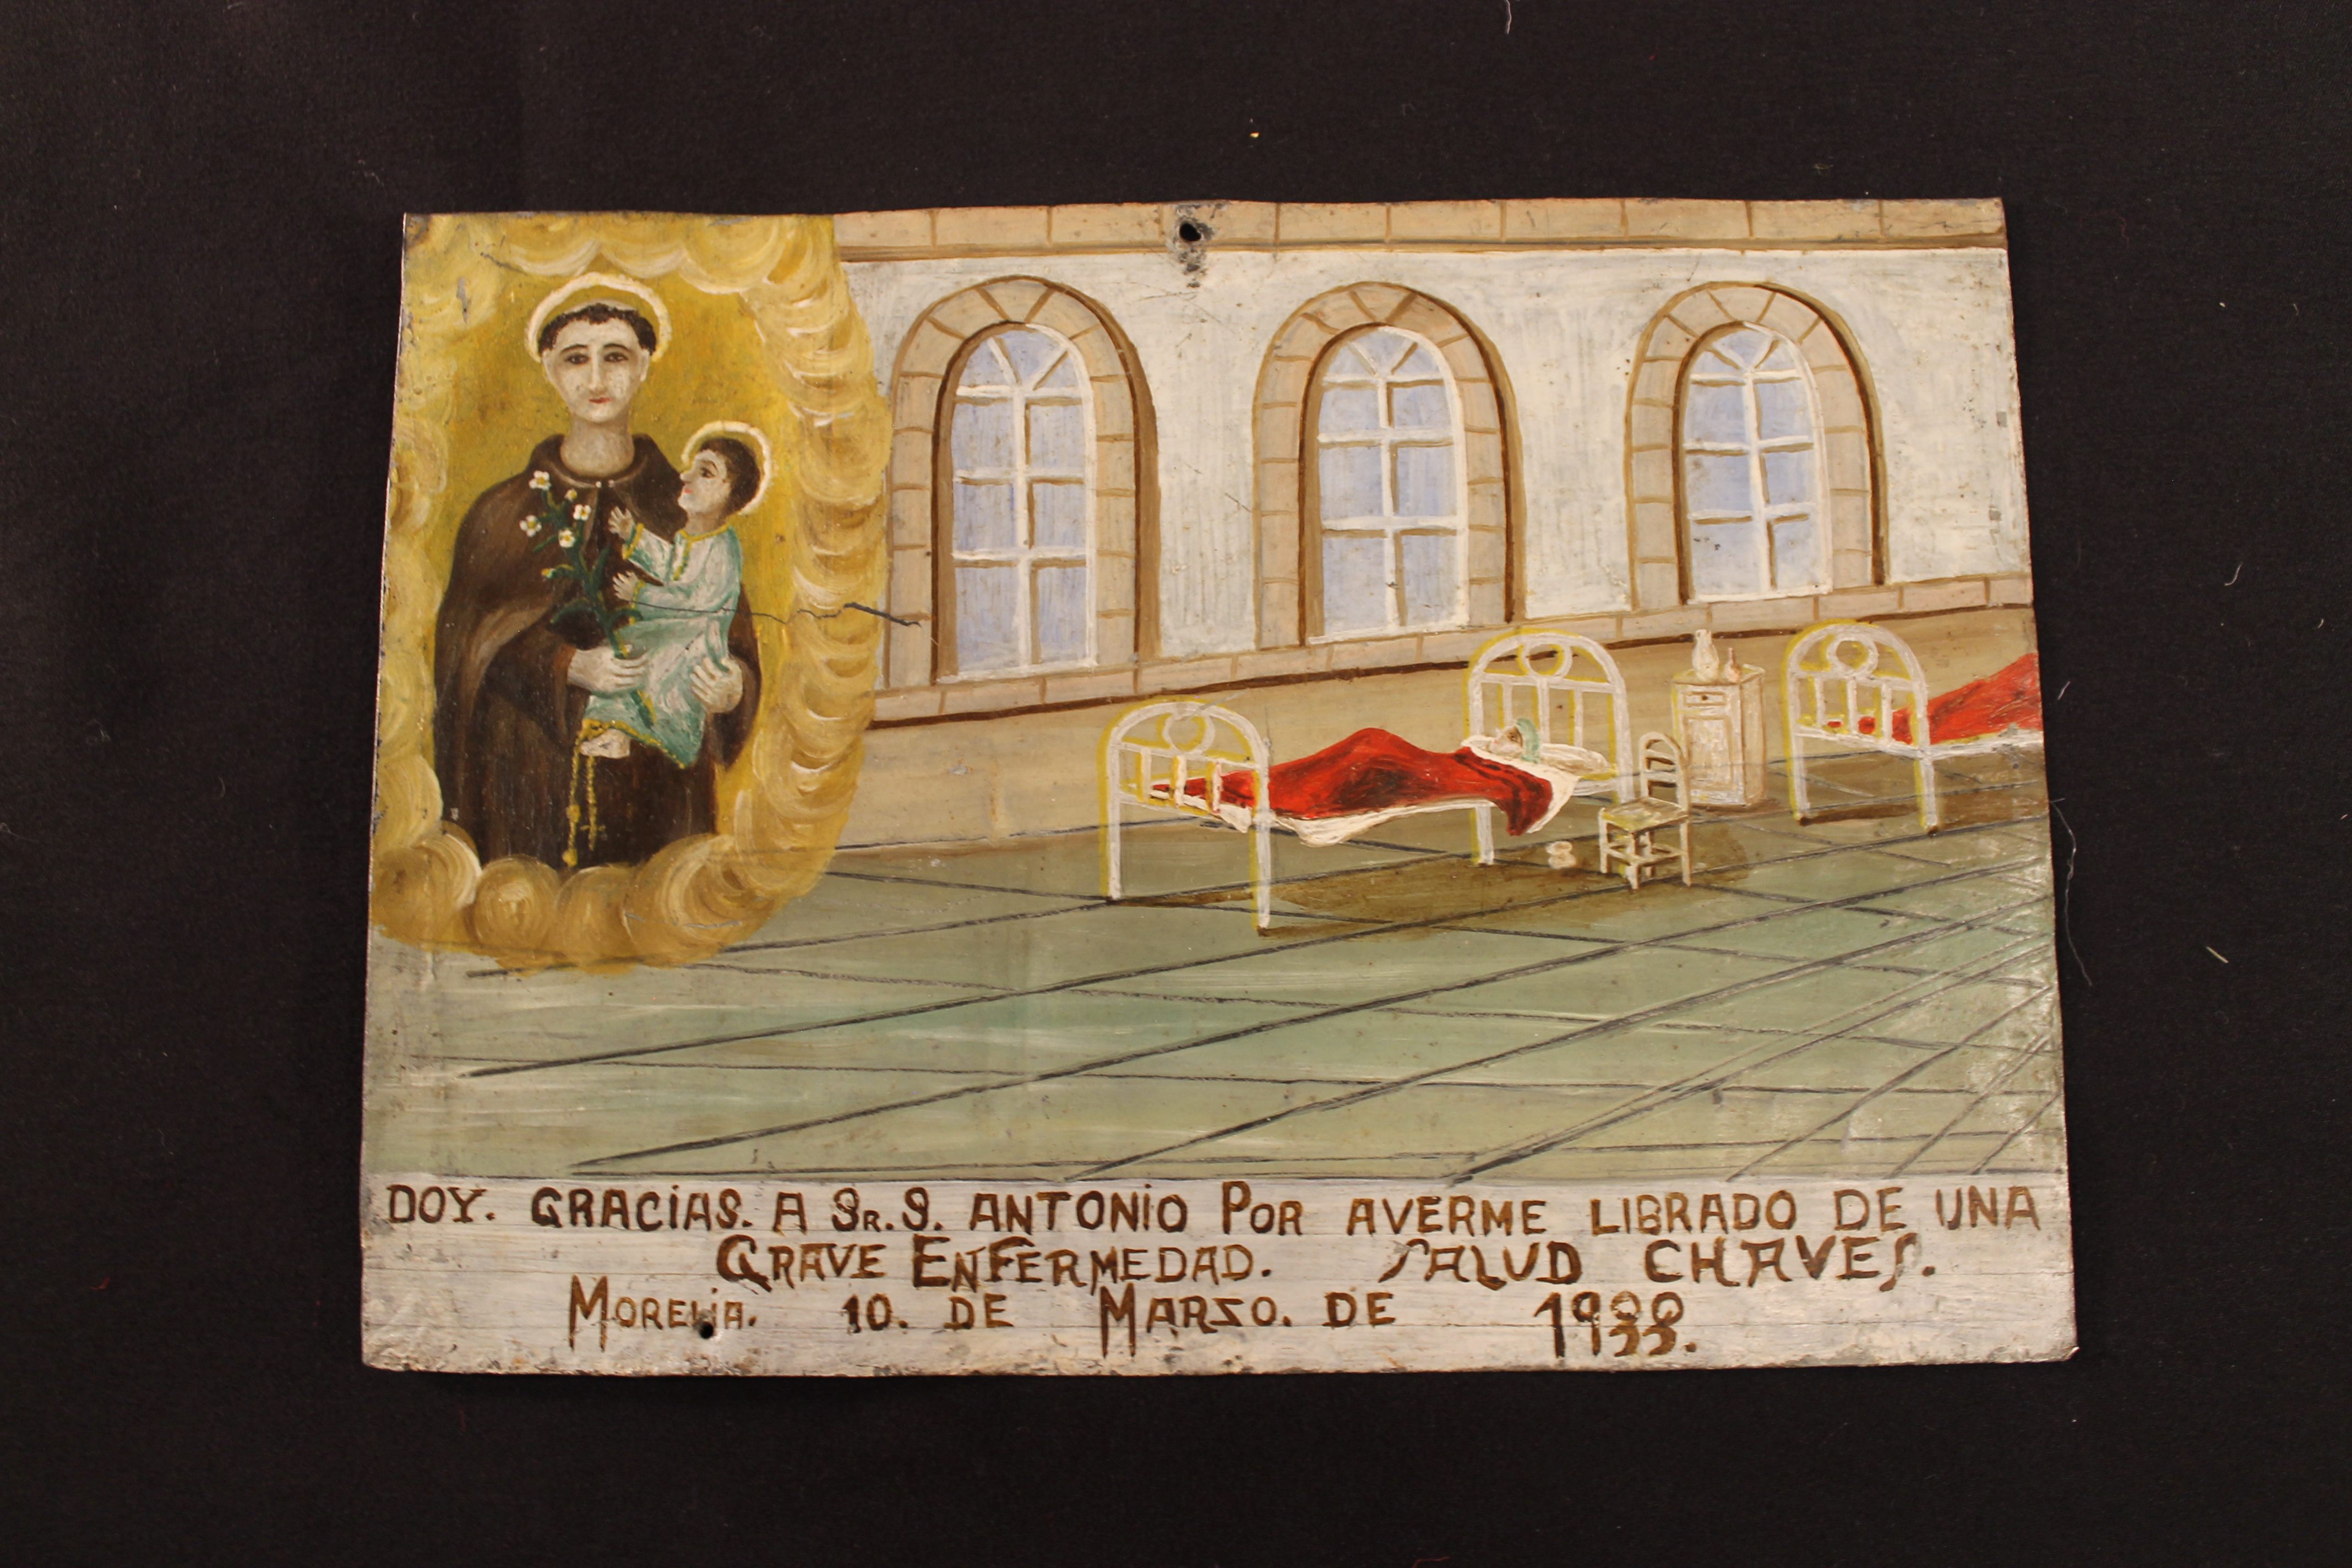 Retablo painting on tin of a patient in a hospital. Saint and baby on the left top corner. Text on objects reads  "Doy Gracias a Sr S. Antonio por averme librado de una grave enfermedad. Salud Chaves. Morelia 10 de Marzo de 1933” English translation: I thank Saint Antonio for having freed me from a serious illness. Cheers Chavez. Morelia March 10, 1988”